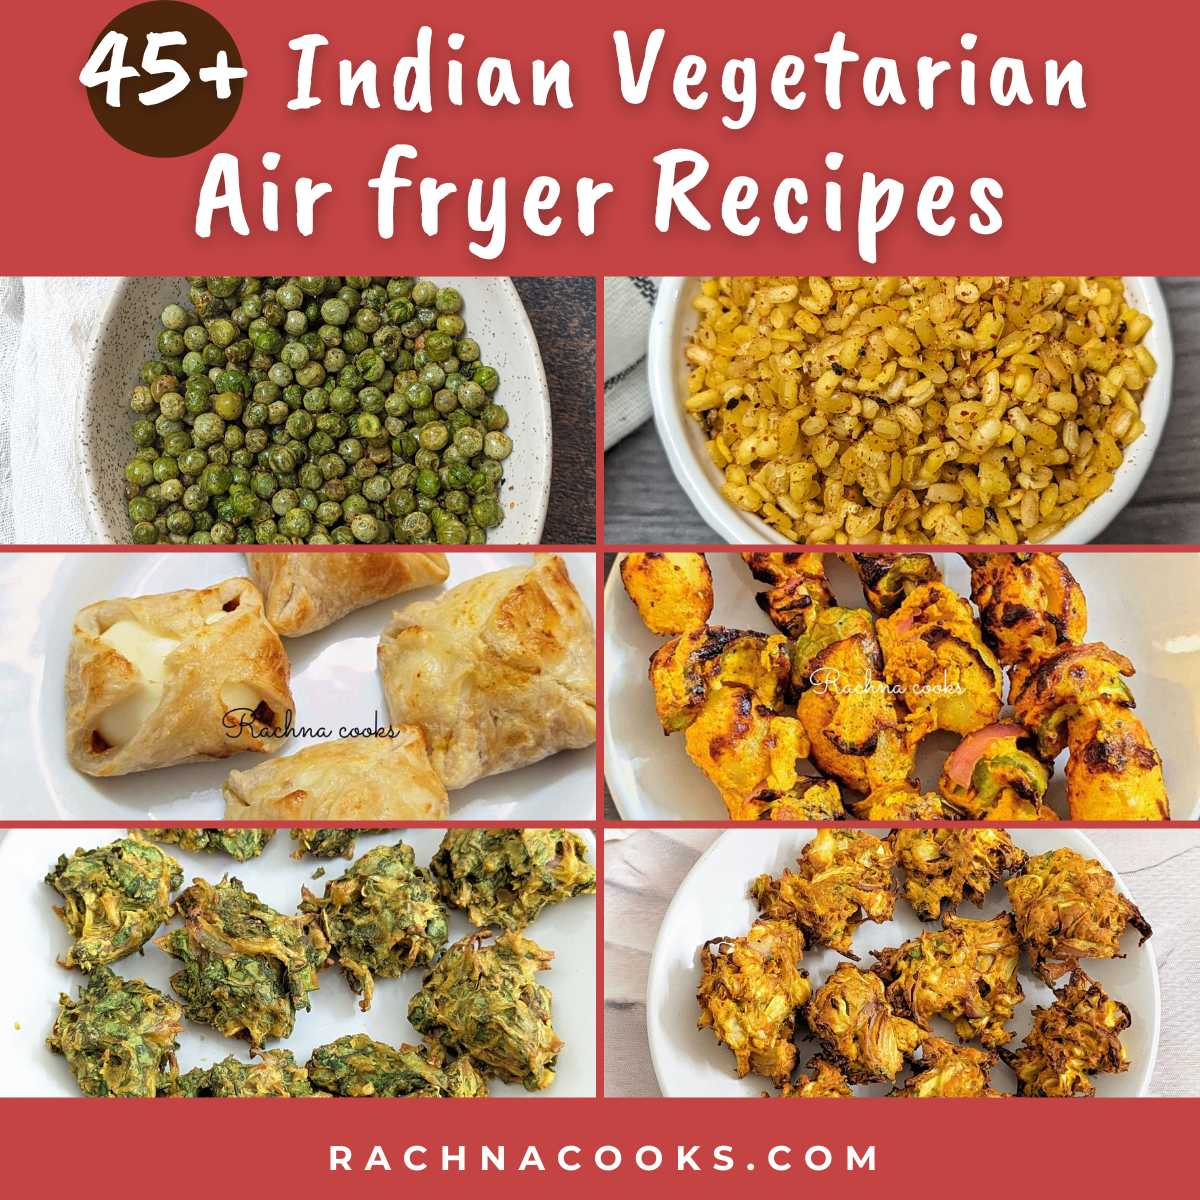 Image showing a collage of Indian vegetarian recipes.